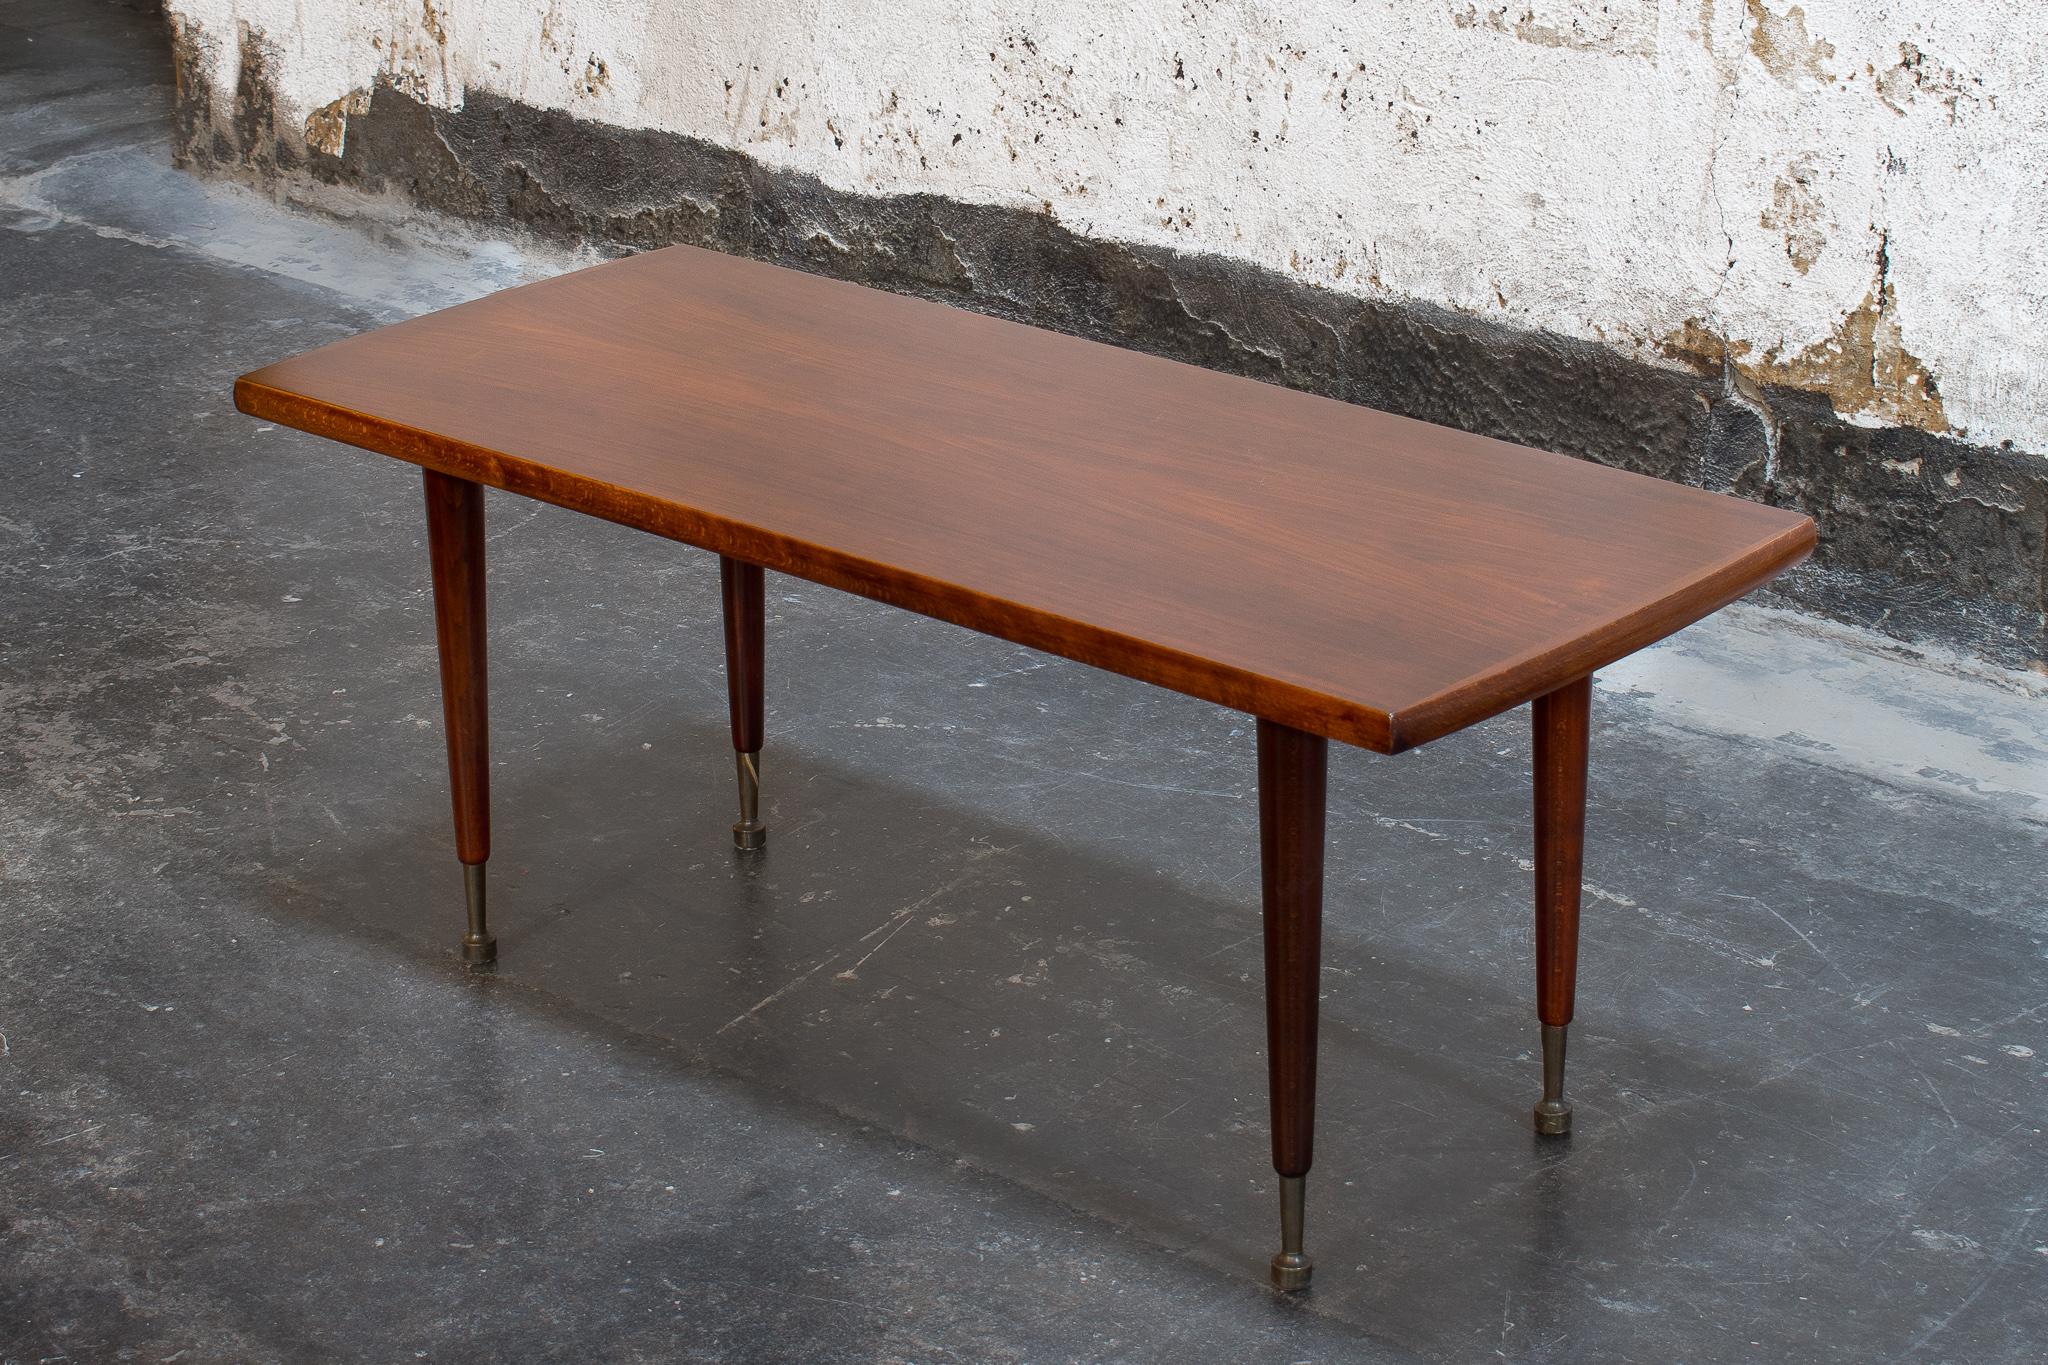 MCM Mahogany coffee table with turned legs and brass caps on the feet. The tabletop is in phenomenal condition and is a beautiful dark, rich, mahogany.